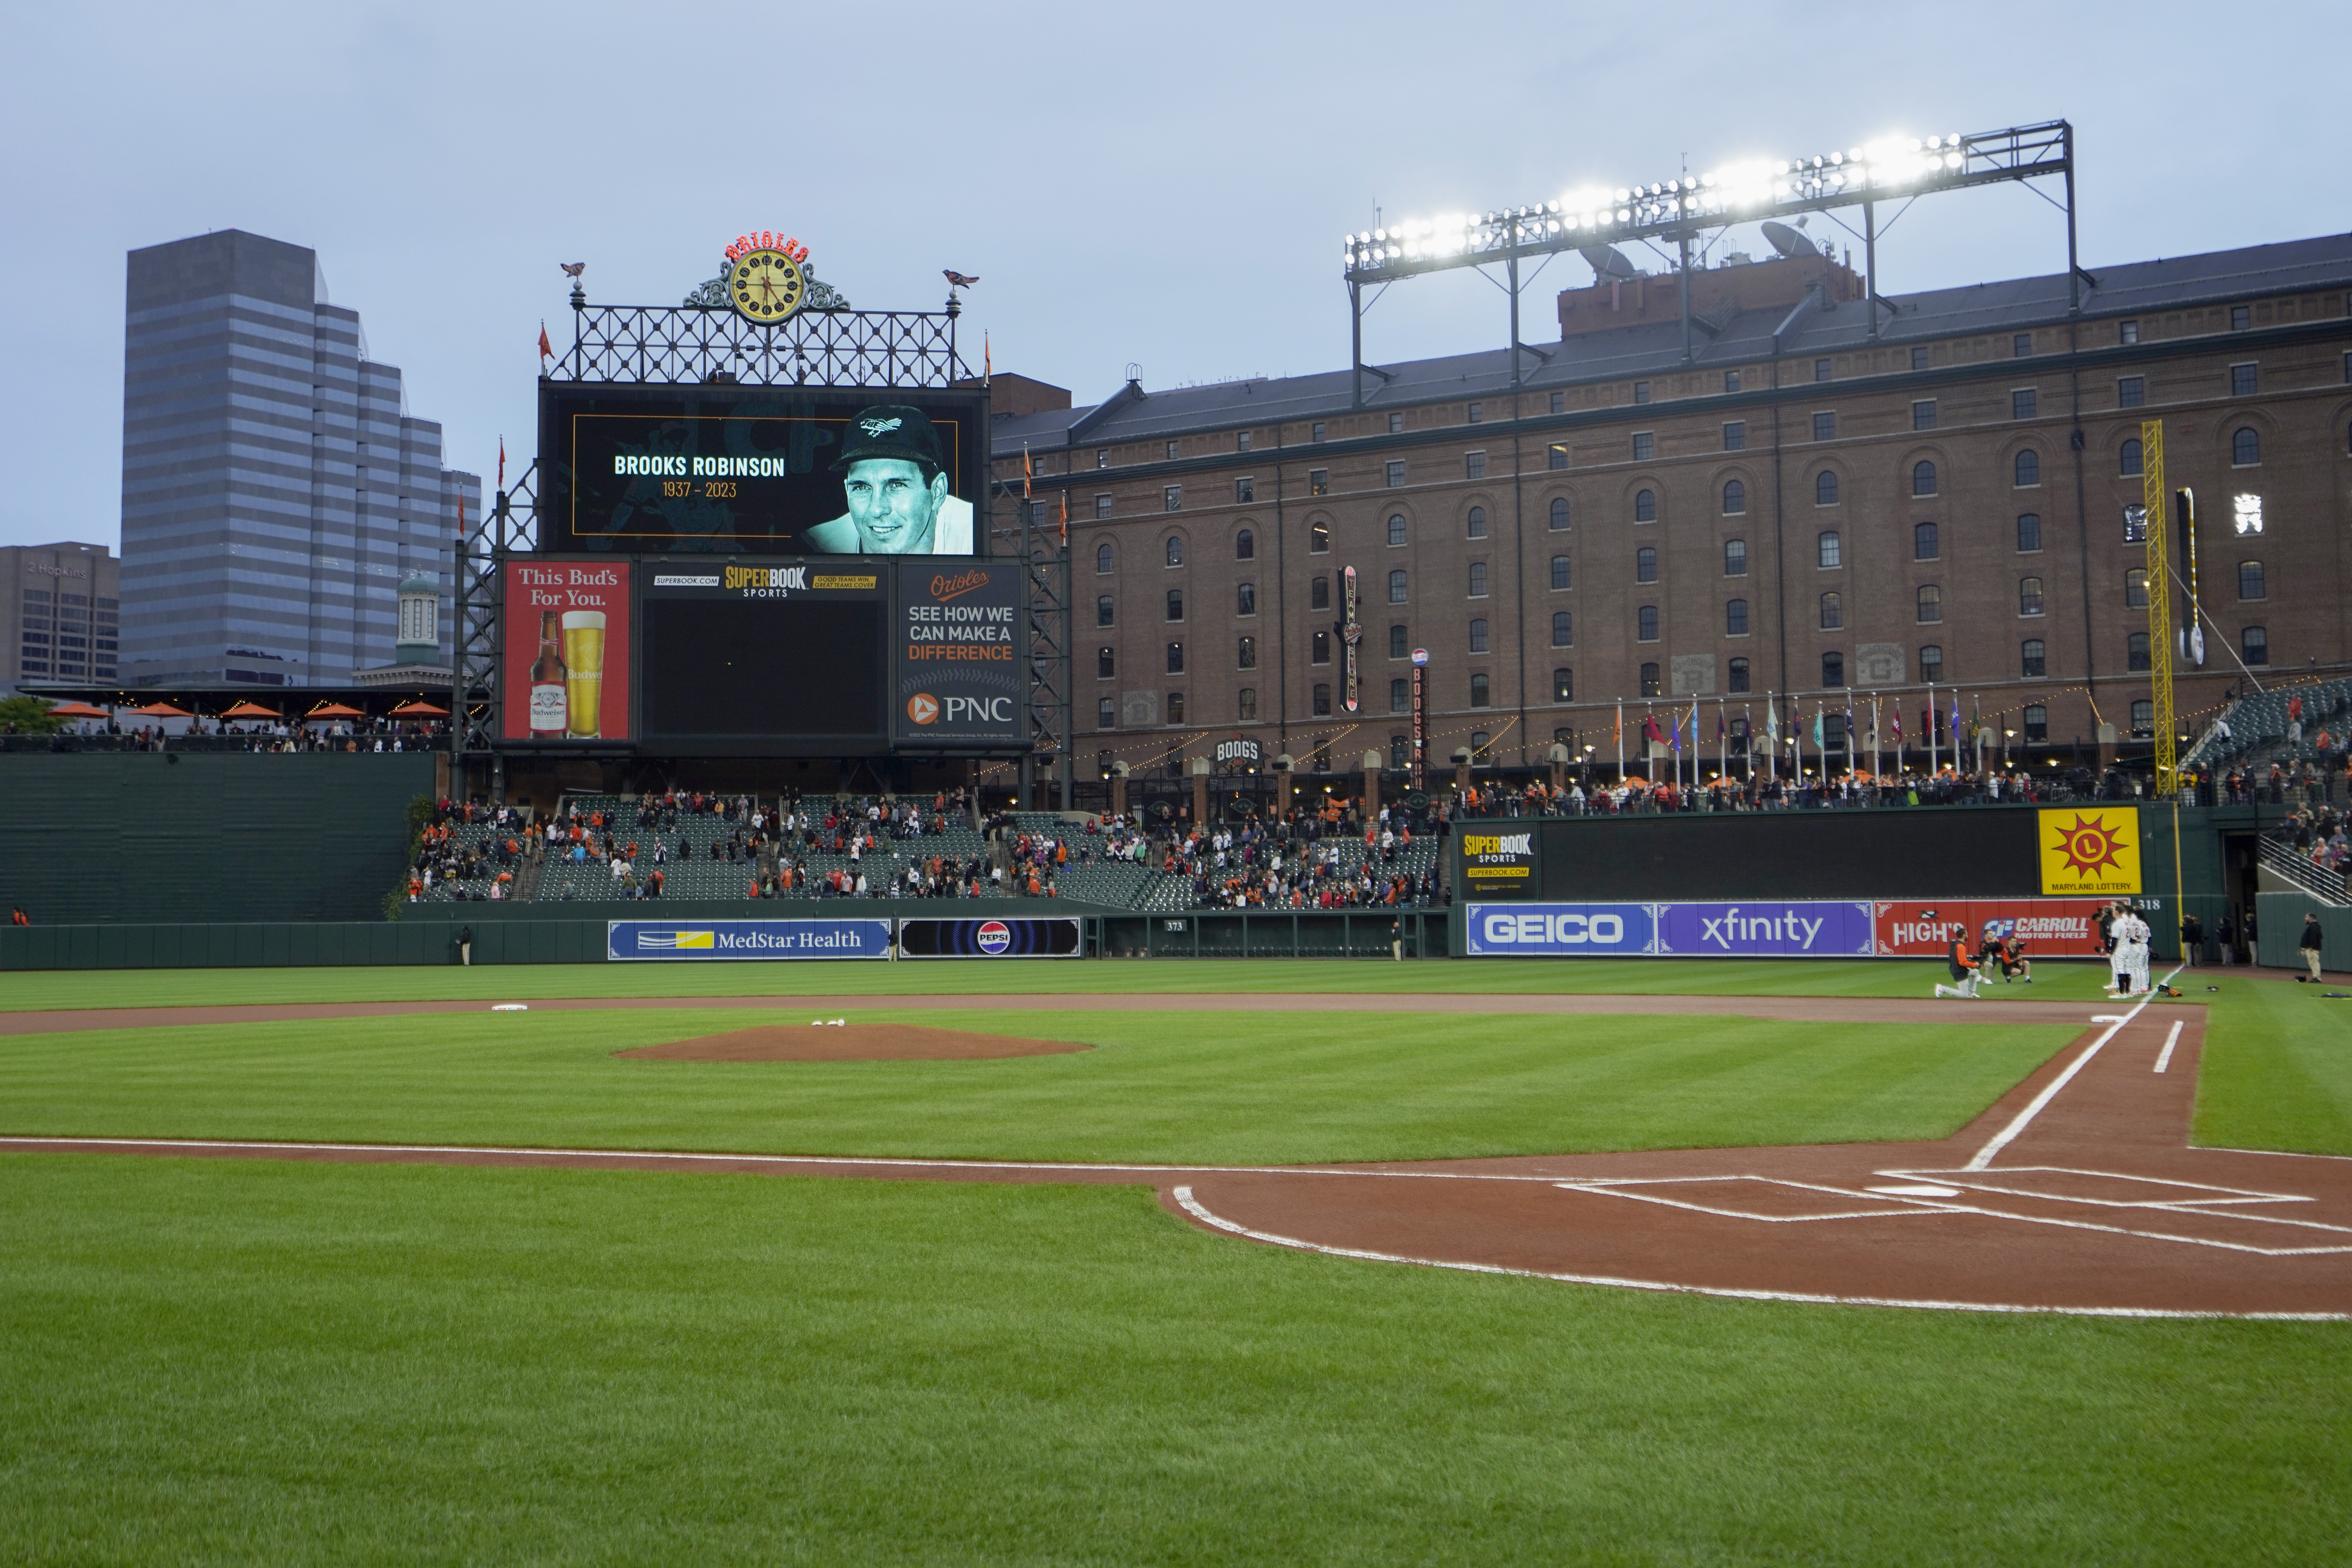 Orioles announce new 30-year deal to stay at Camden Yards - The Boston Globe